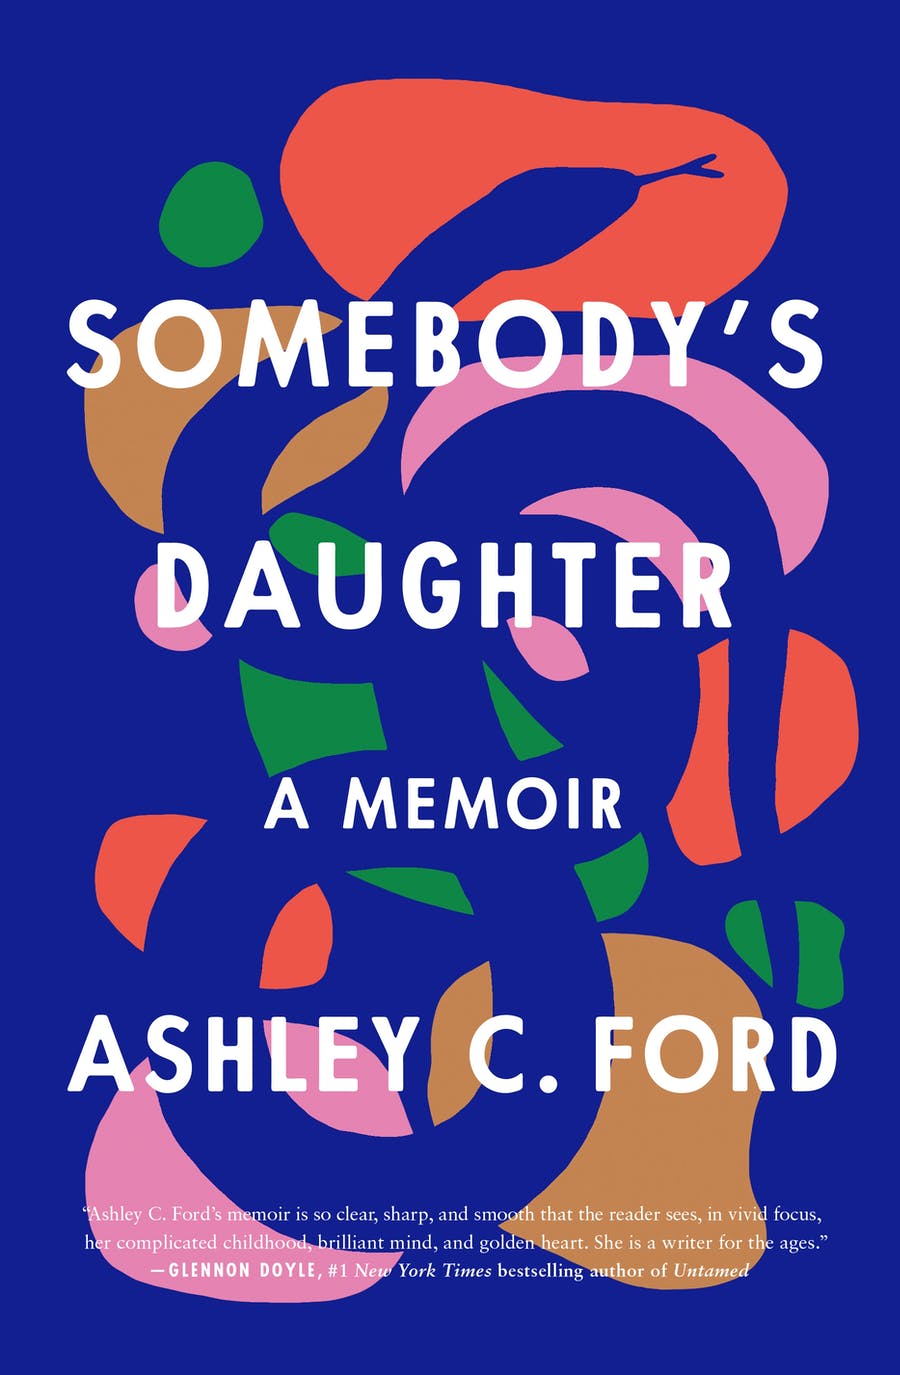 Cover of Somebody's Daughter; the silhouette of a snake over multicolored rounded shapes